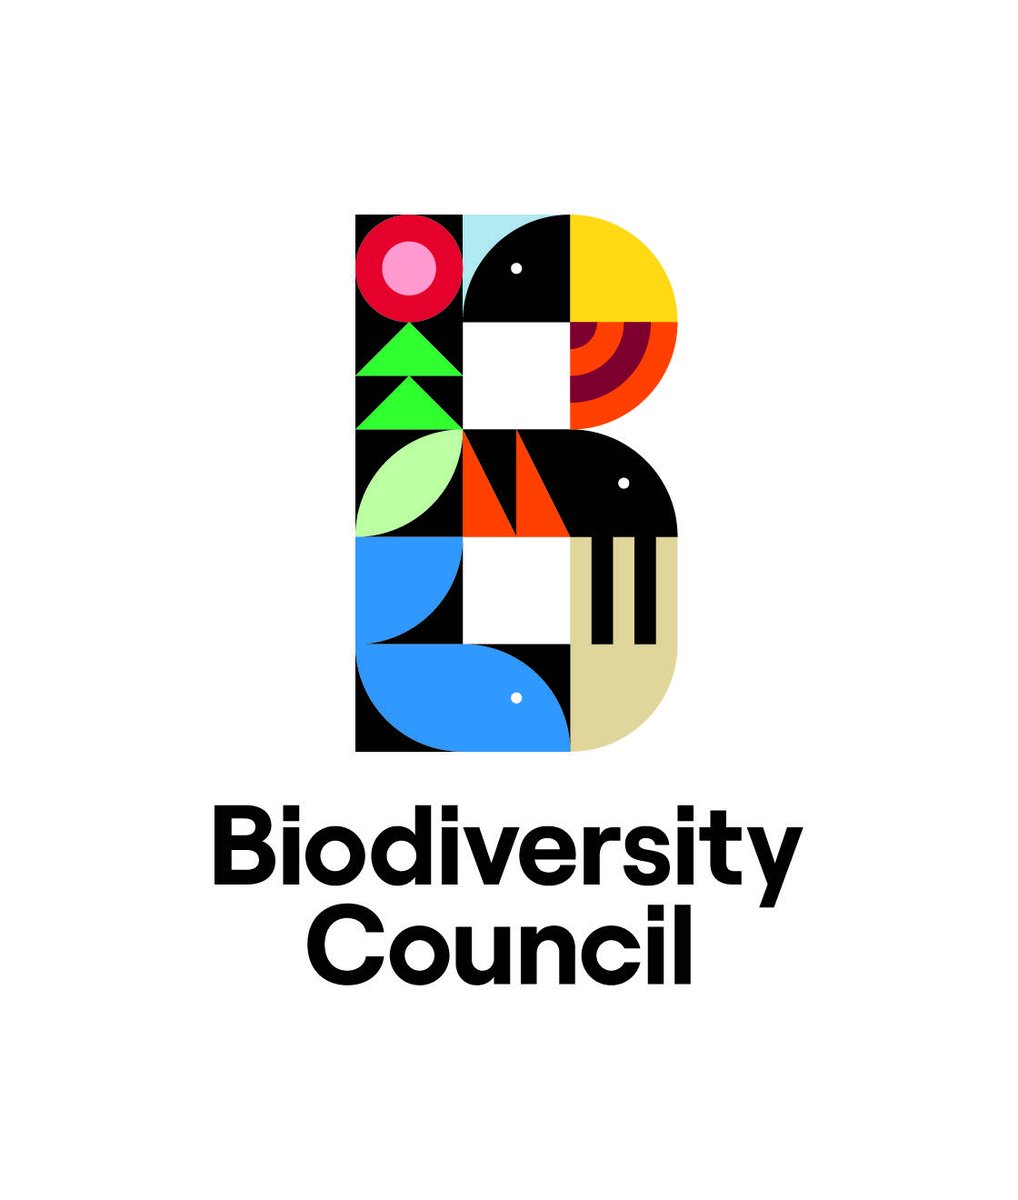 The Biodiversity Council is 1 day old. It’s been a big 24 hours. Thanks so much to everyone who’s helped us launch. Too many names to tweet. Now it’s time for us to nourish and protect the thing that nourishes and protects us -